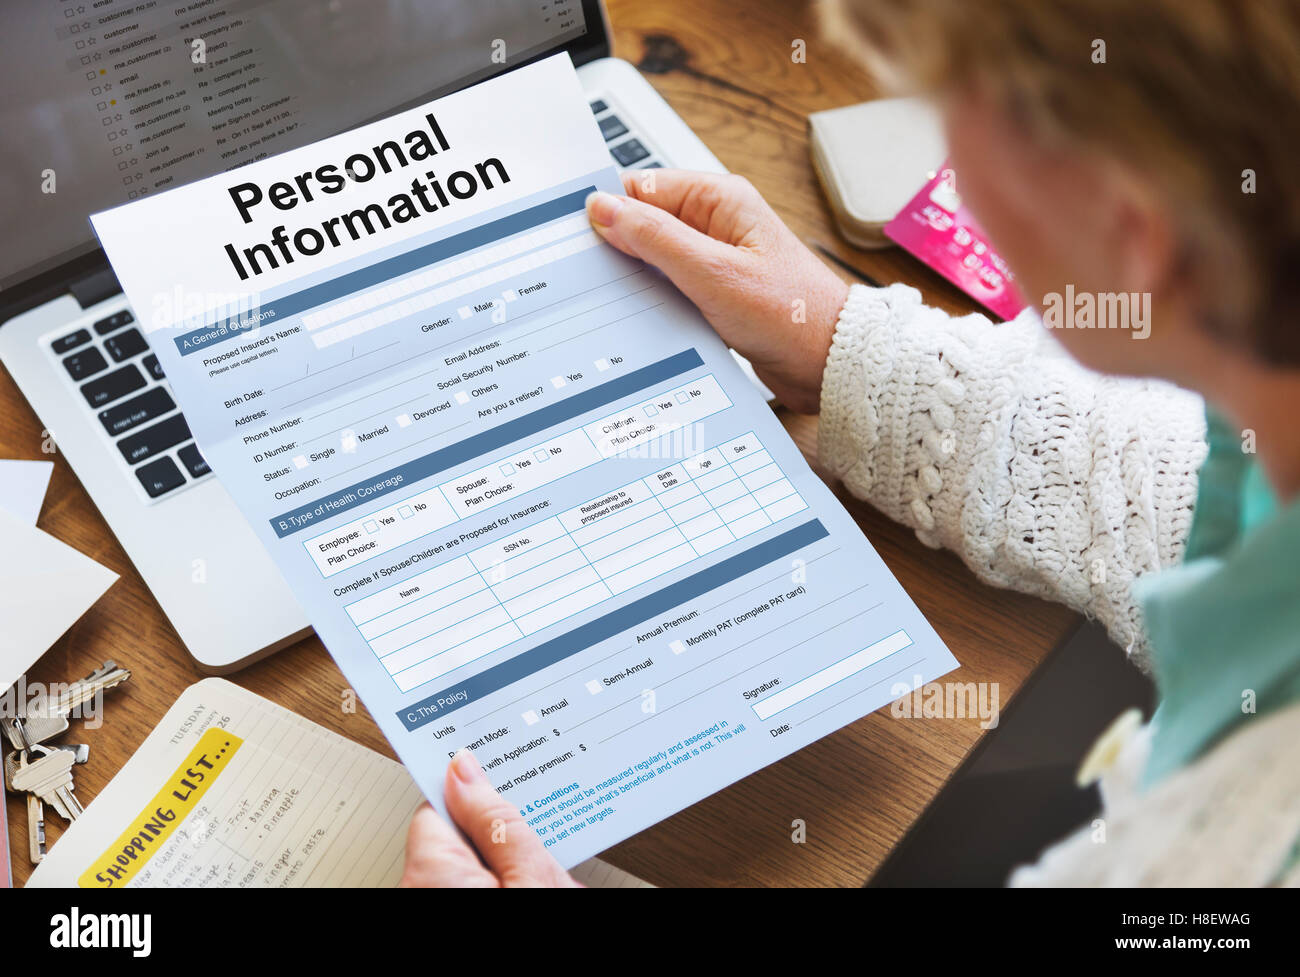 Personal Information Form Identity Concept Stock Photo